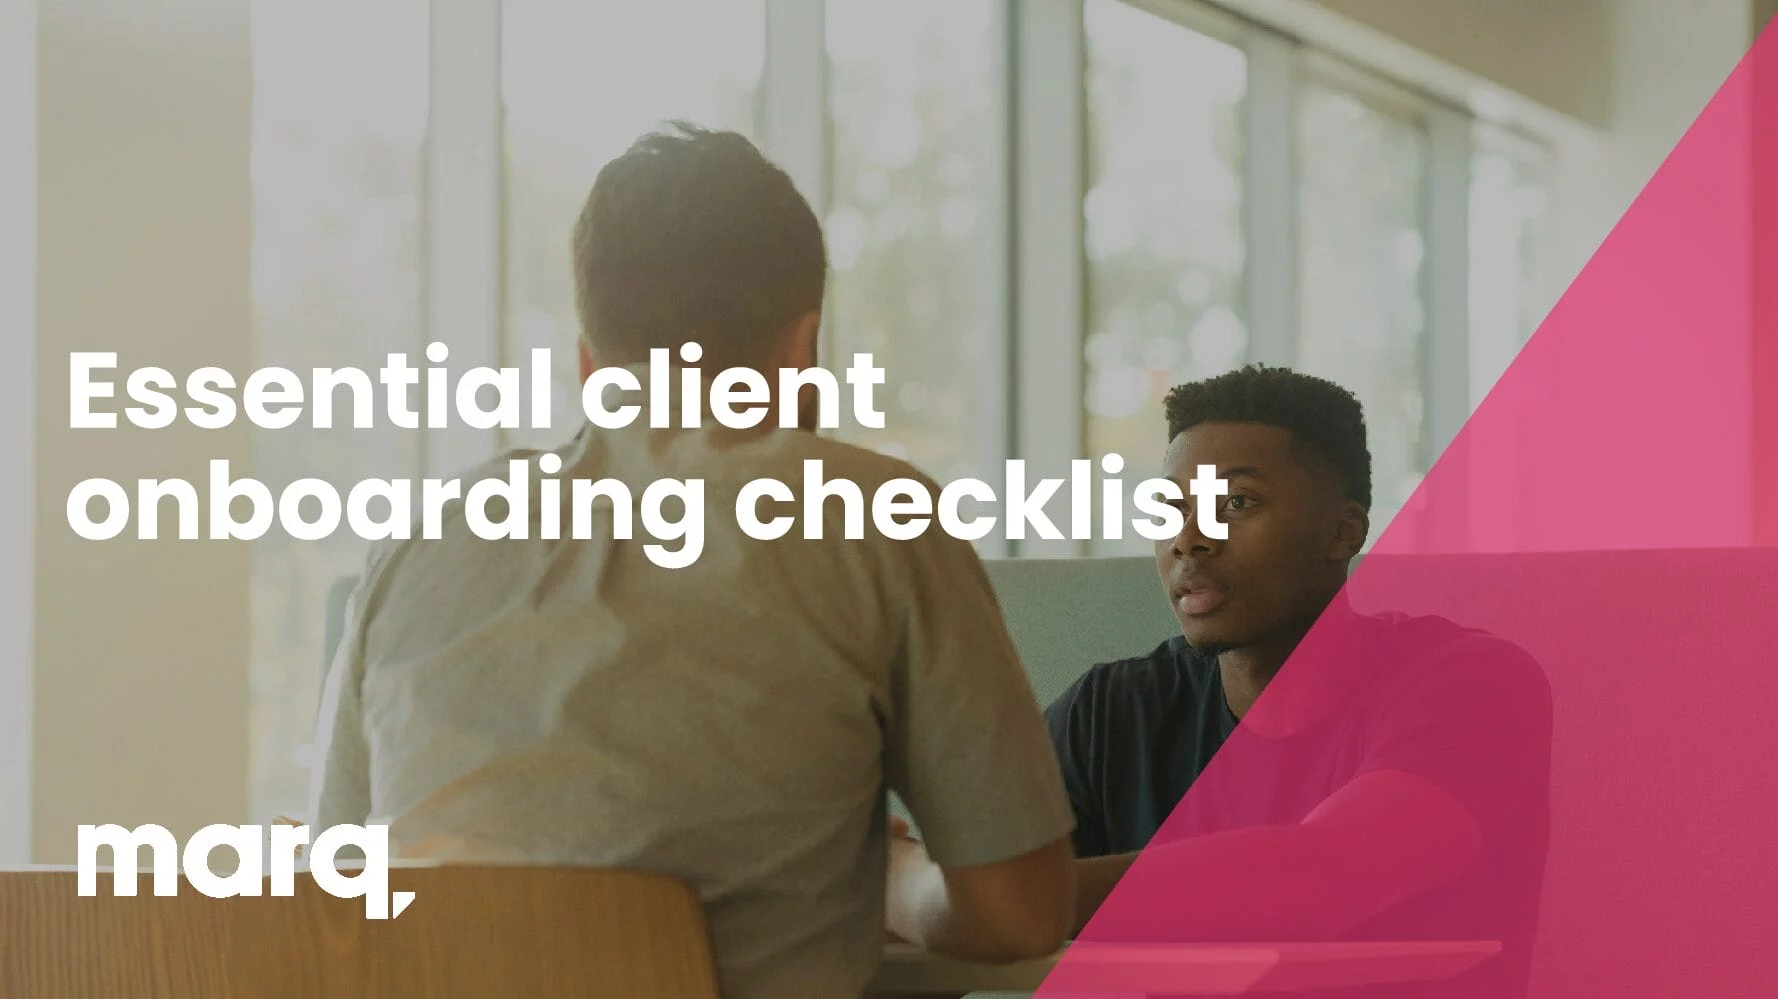 Essential client onboarding checklist for agencies